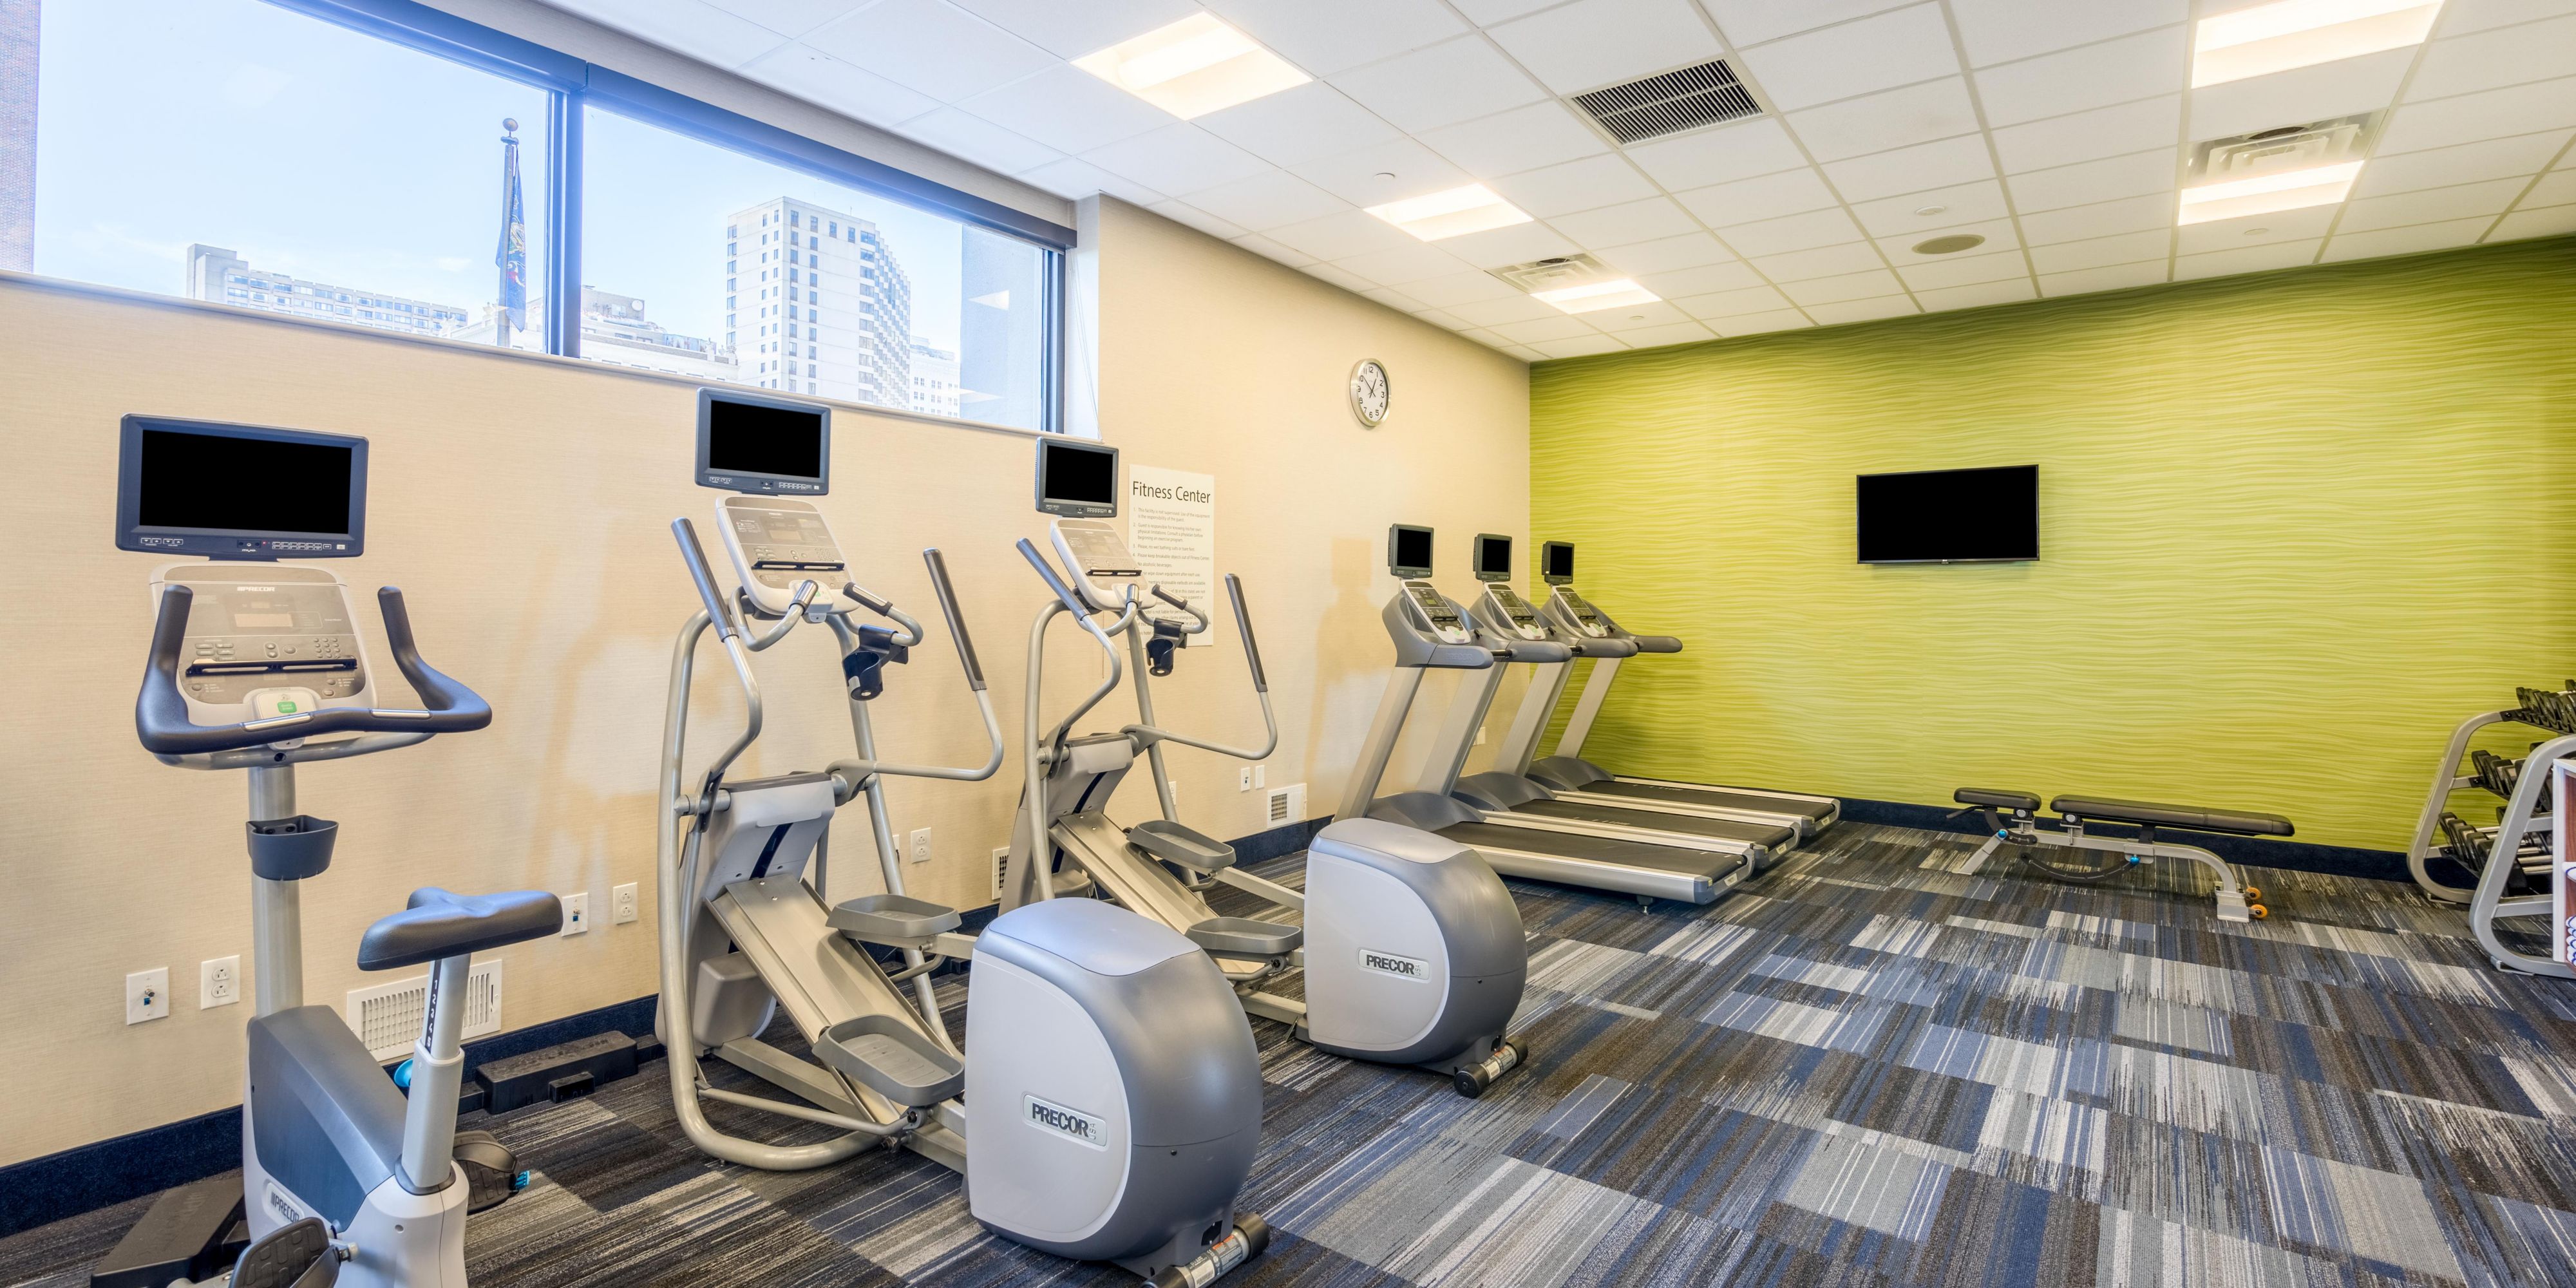 Stay committed to your fitness routine with an invigorating workout in our state-of-the-art 24-hour fitness center. Equipped with top-of-the-line Precor machines, free weights, and fitness stability balls, you can sculpt and strengthen at your convenience. 